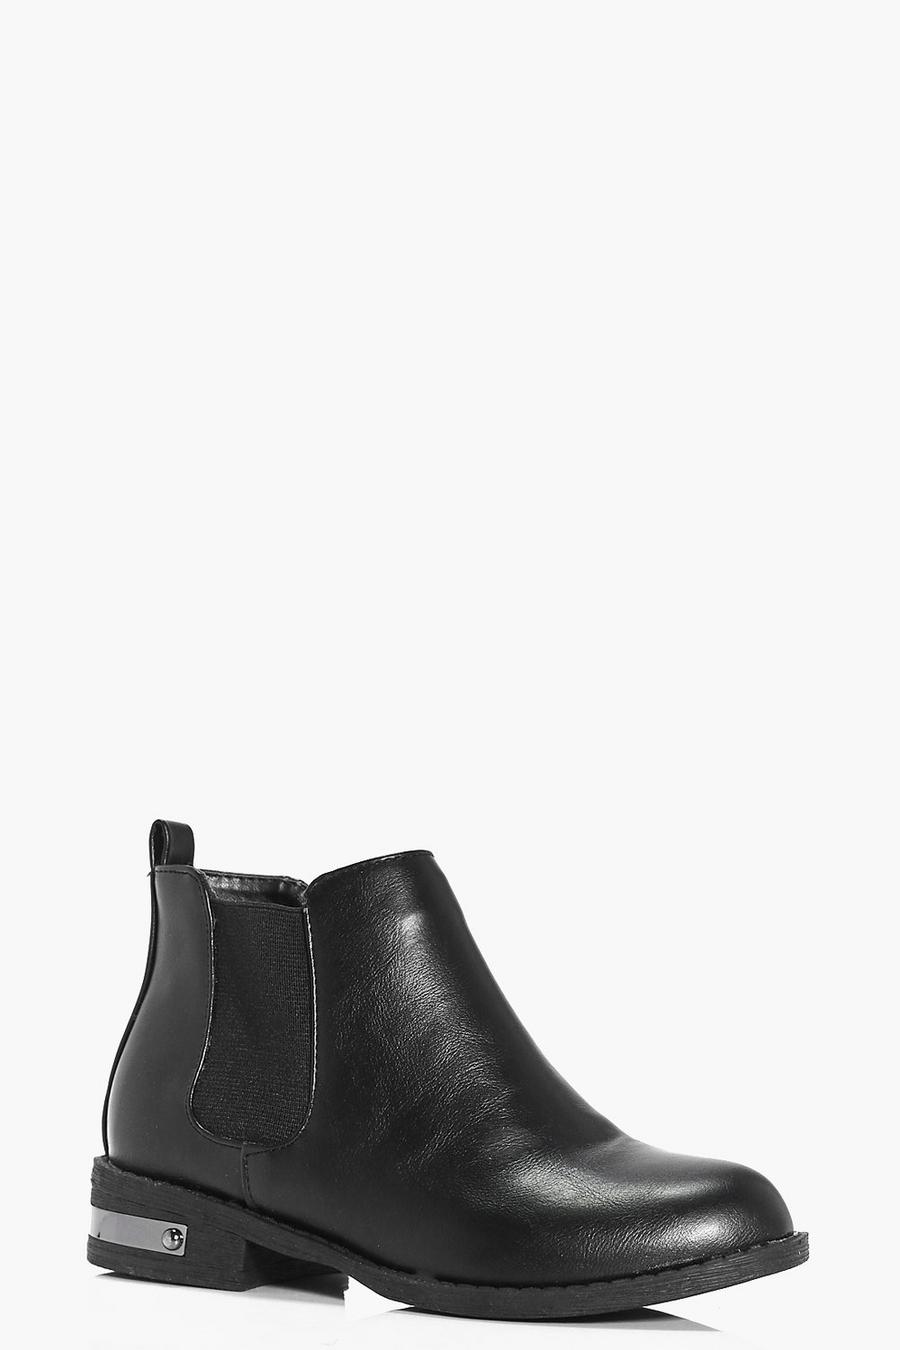 Girls Basic Chelsea Boots image number 1